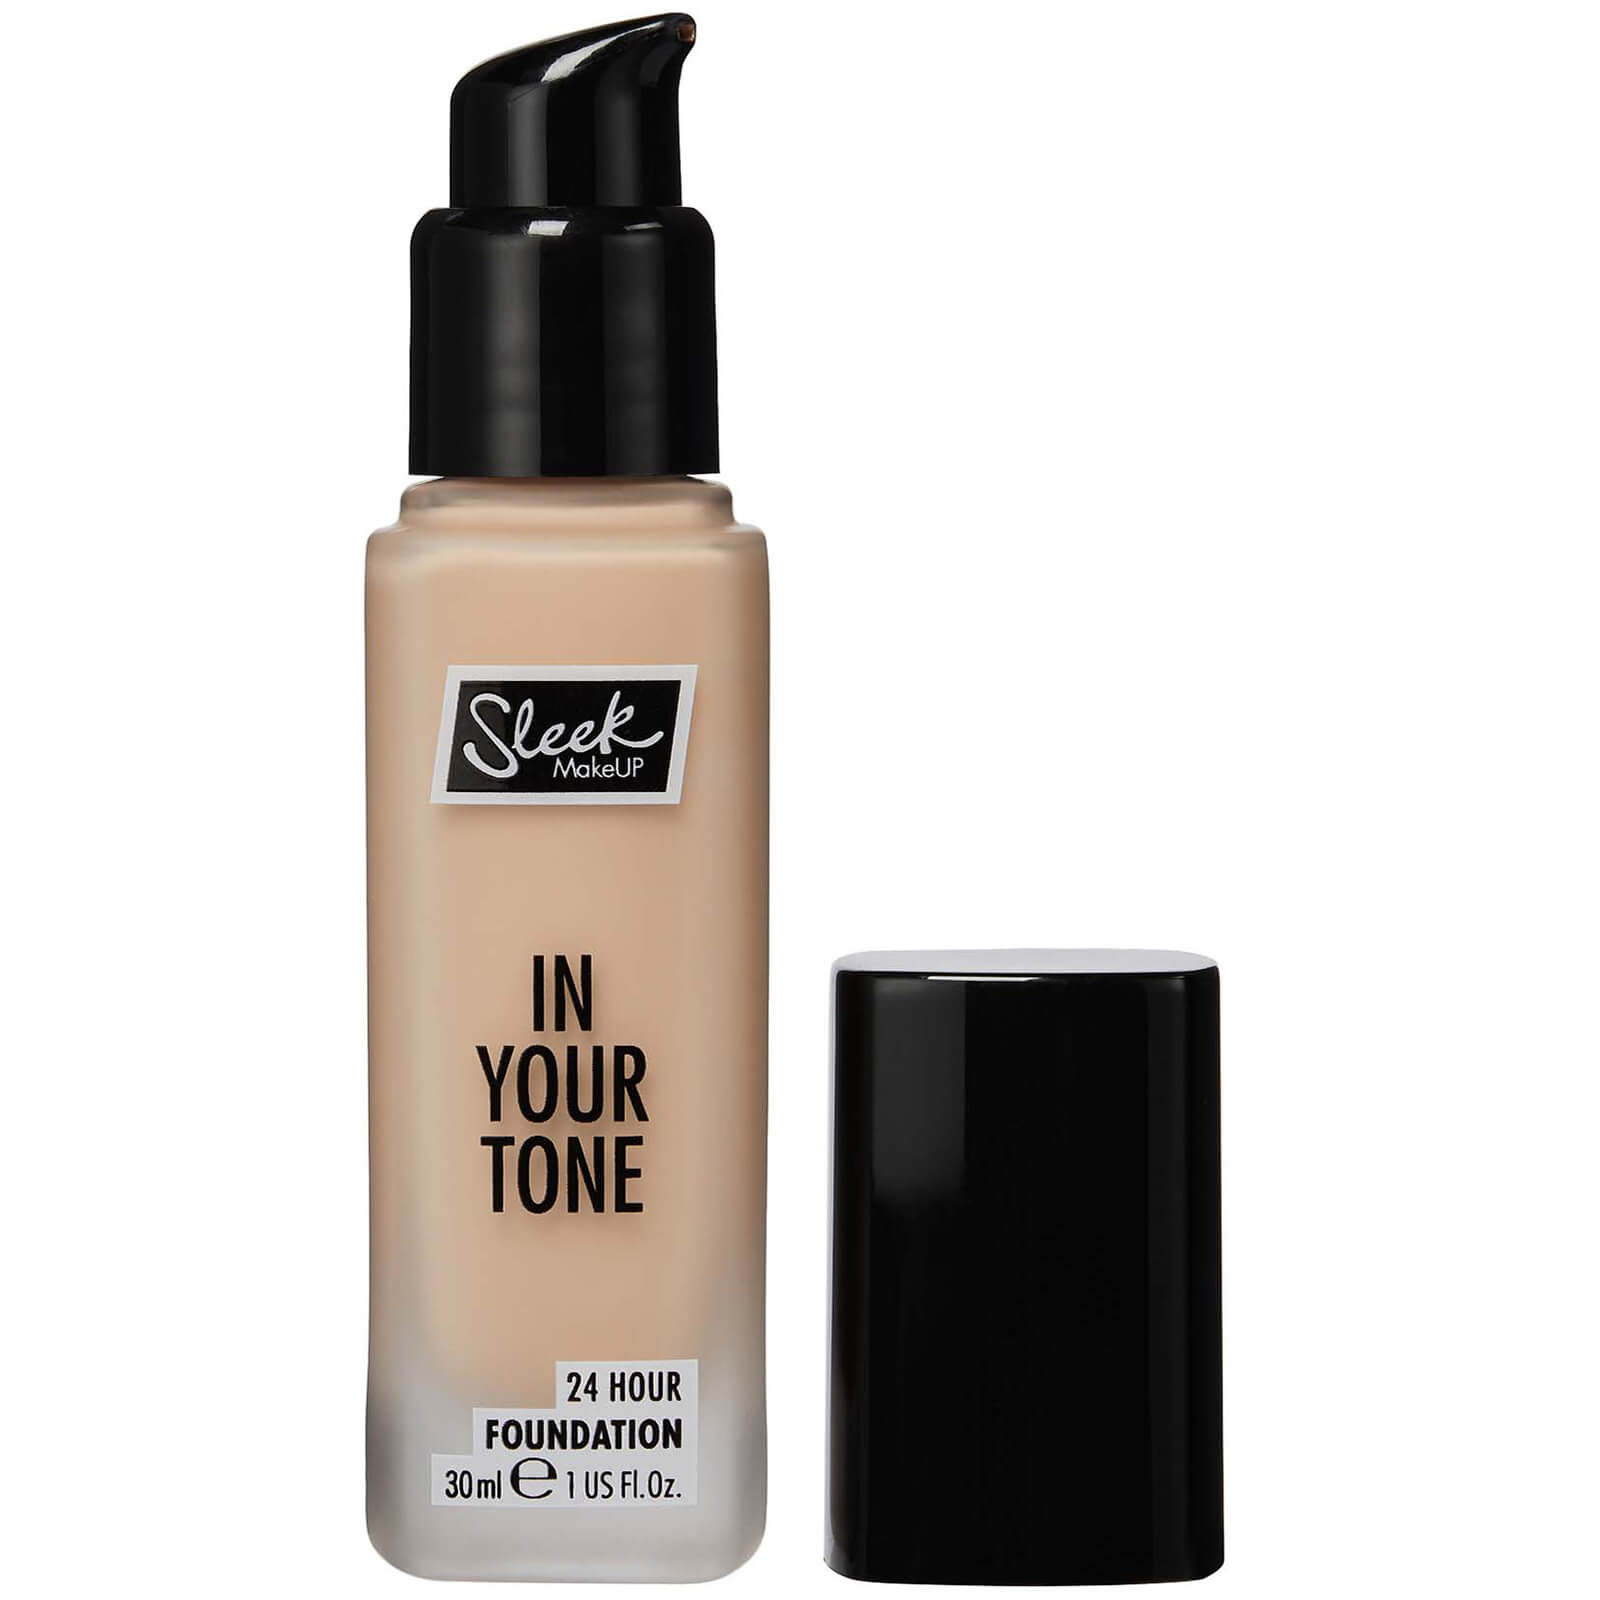 Sleek MakeUP in Your Tone 24 Hour Foundation 30ml (Various Shades) - 3N